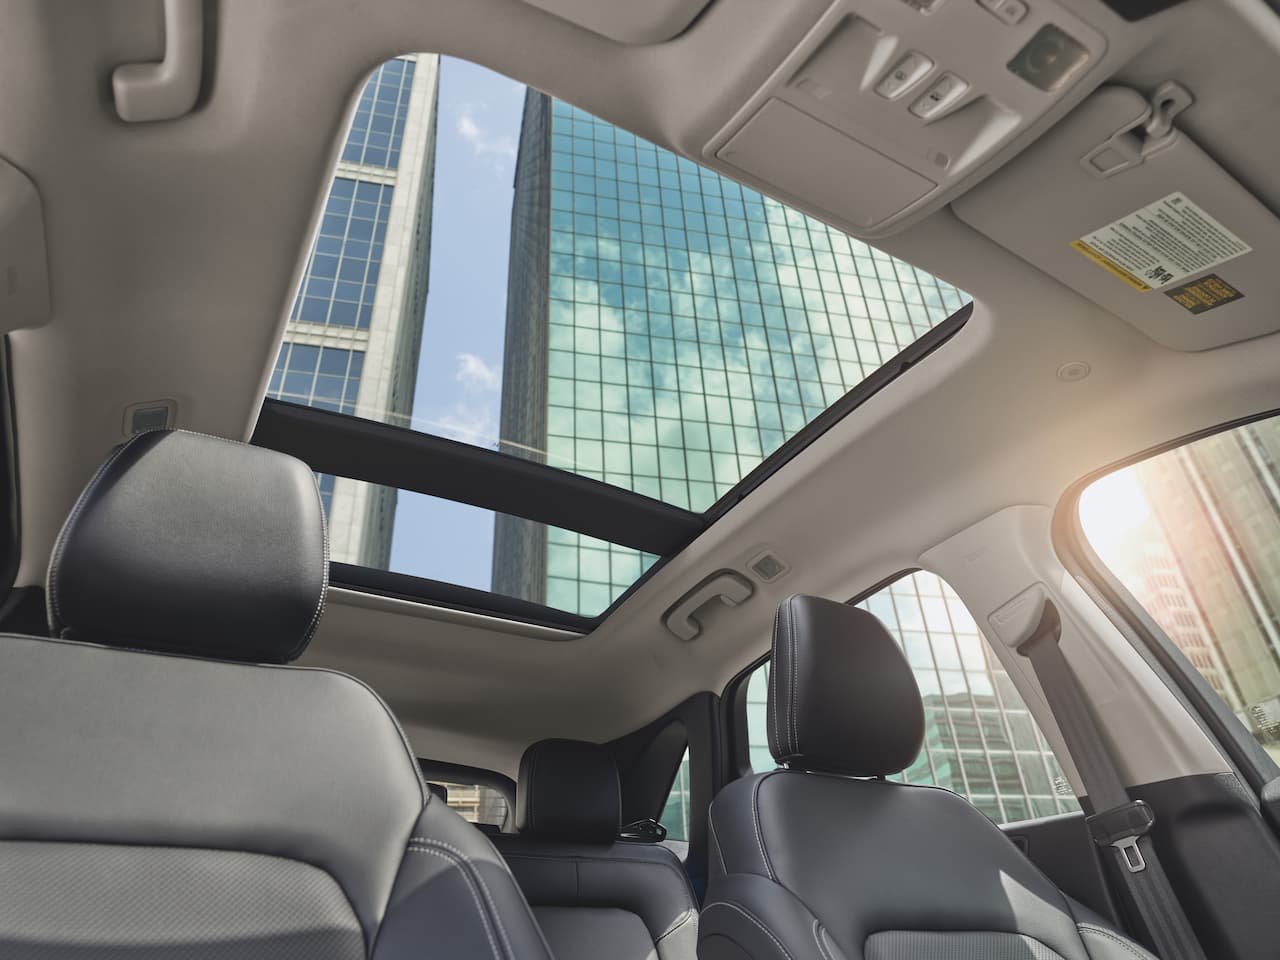 2022 Ford Escape Panoramic Sunroof